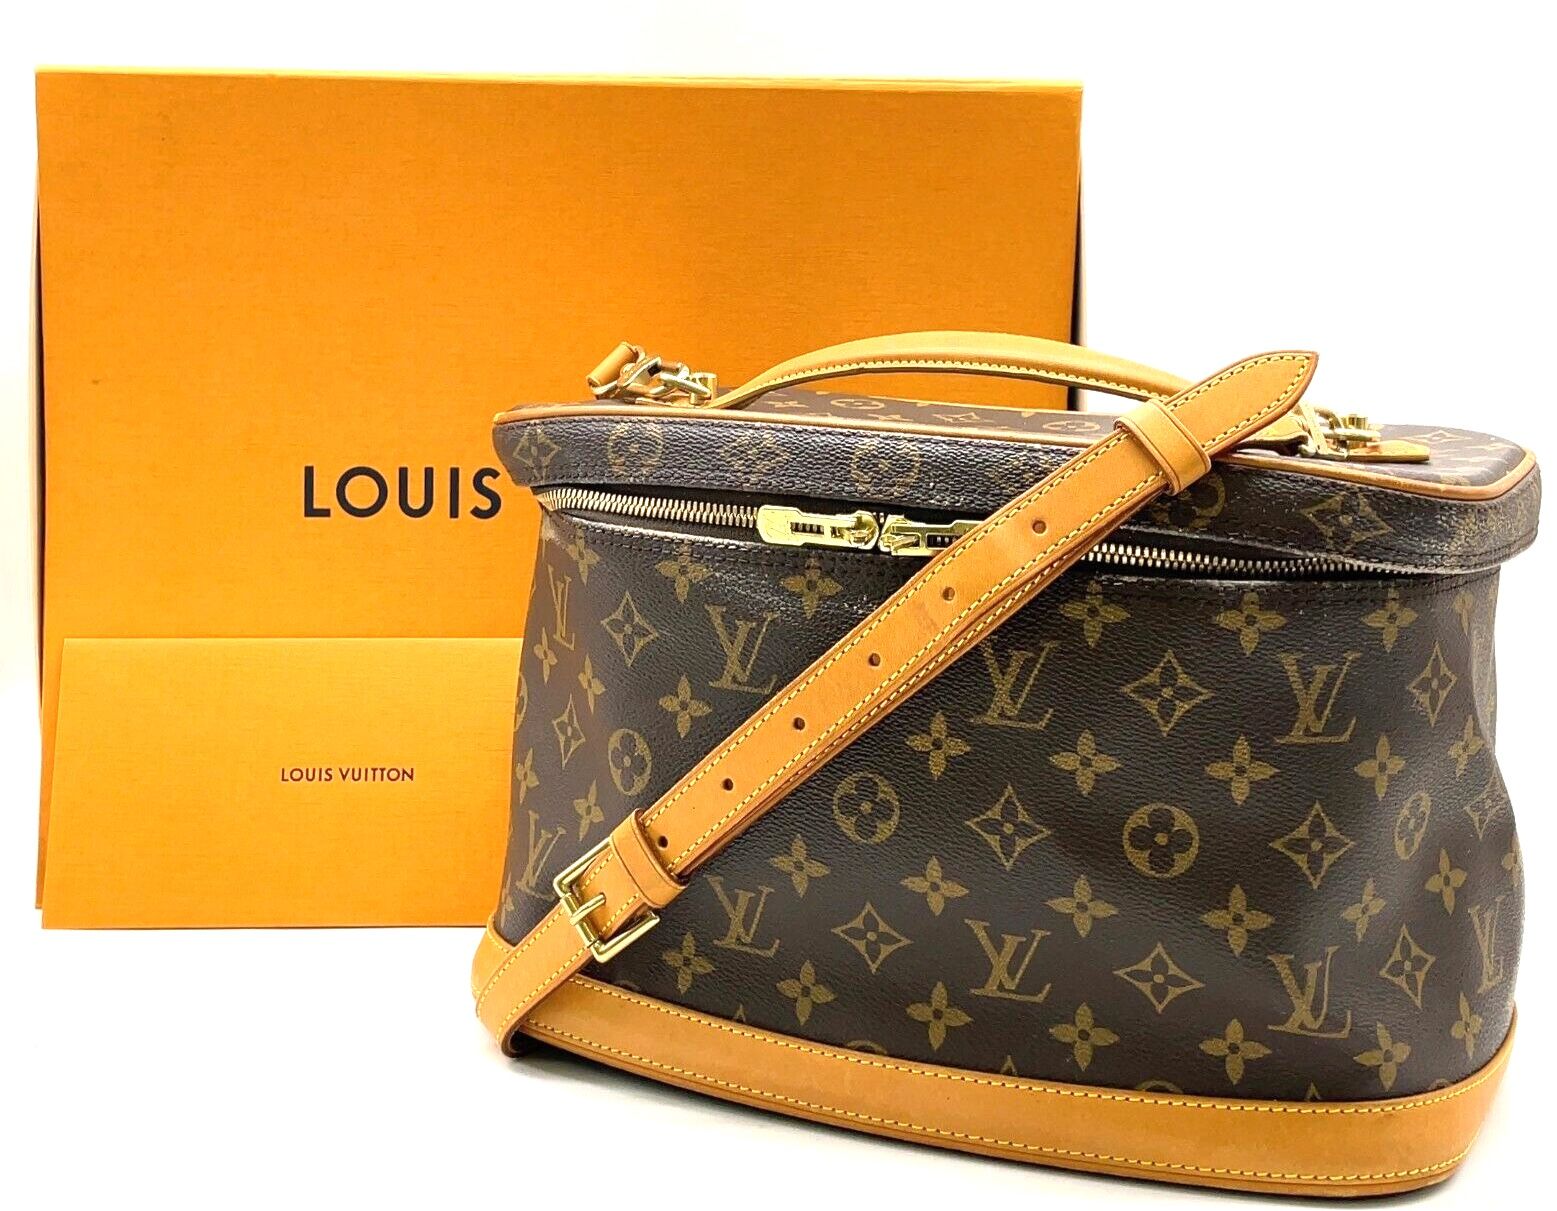 Real Louis Vuitton Bag for Sale in West Los Angeles, CA - OfferUp